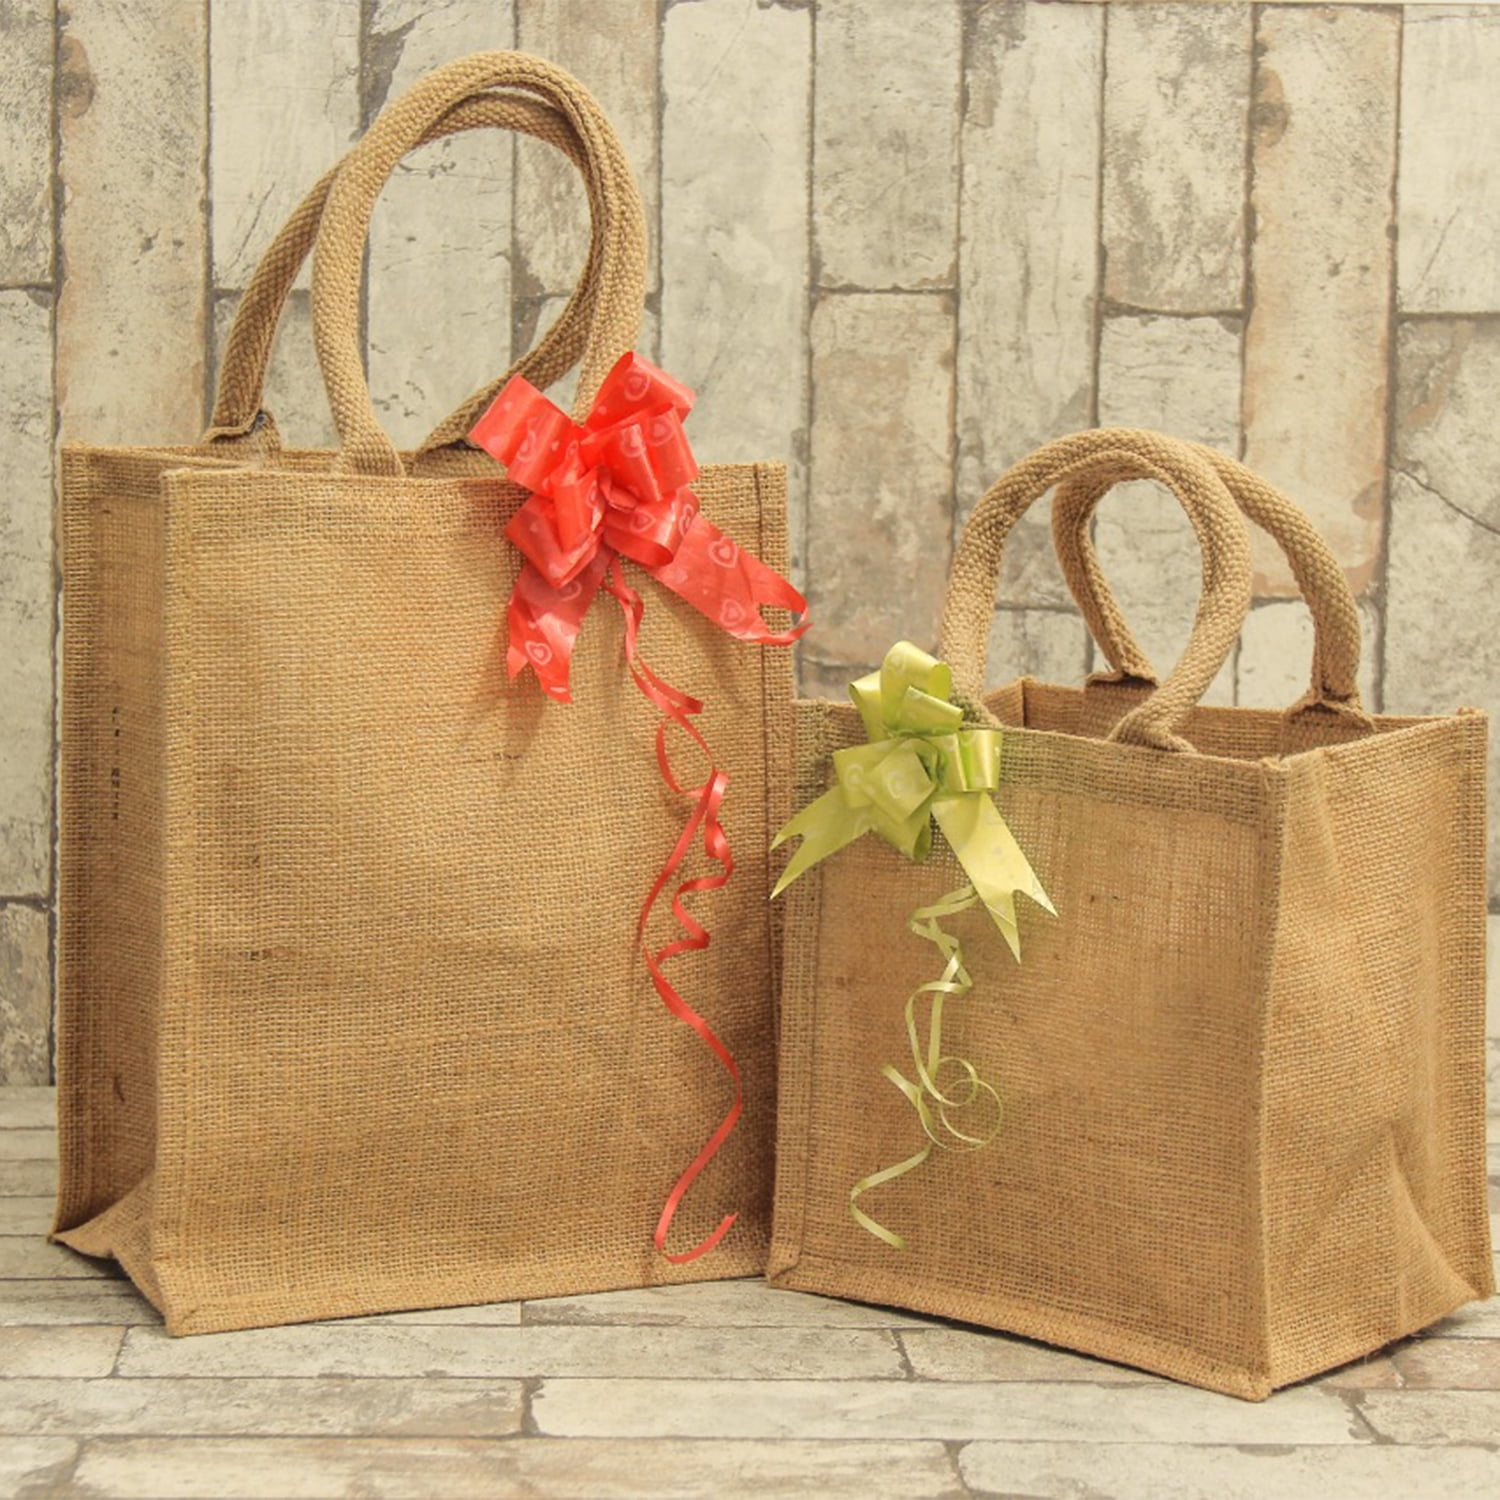 Segarty Tote Bags, 6 Pack Small Burlap Jute Reusable Canvas Gift Favors Bag  with handles Blank Totes Bulk for Bridesmaid Wedding, Women Market Grocery